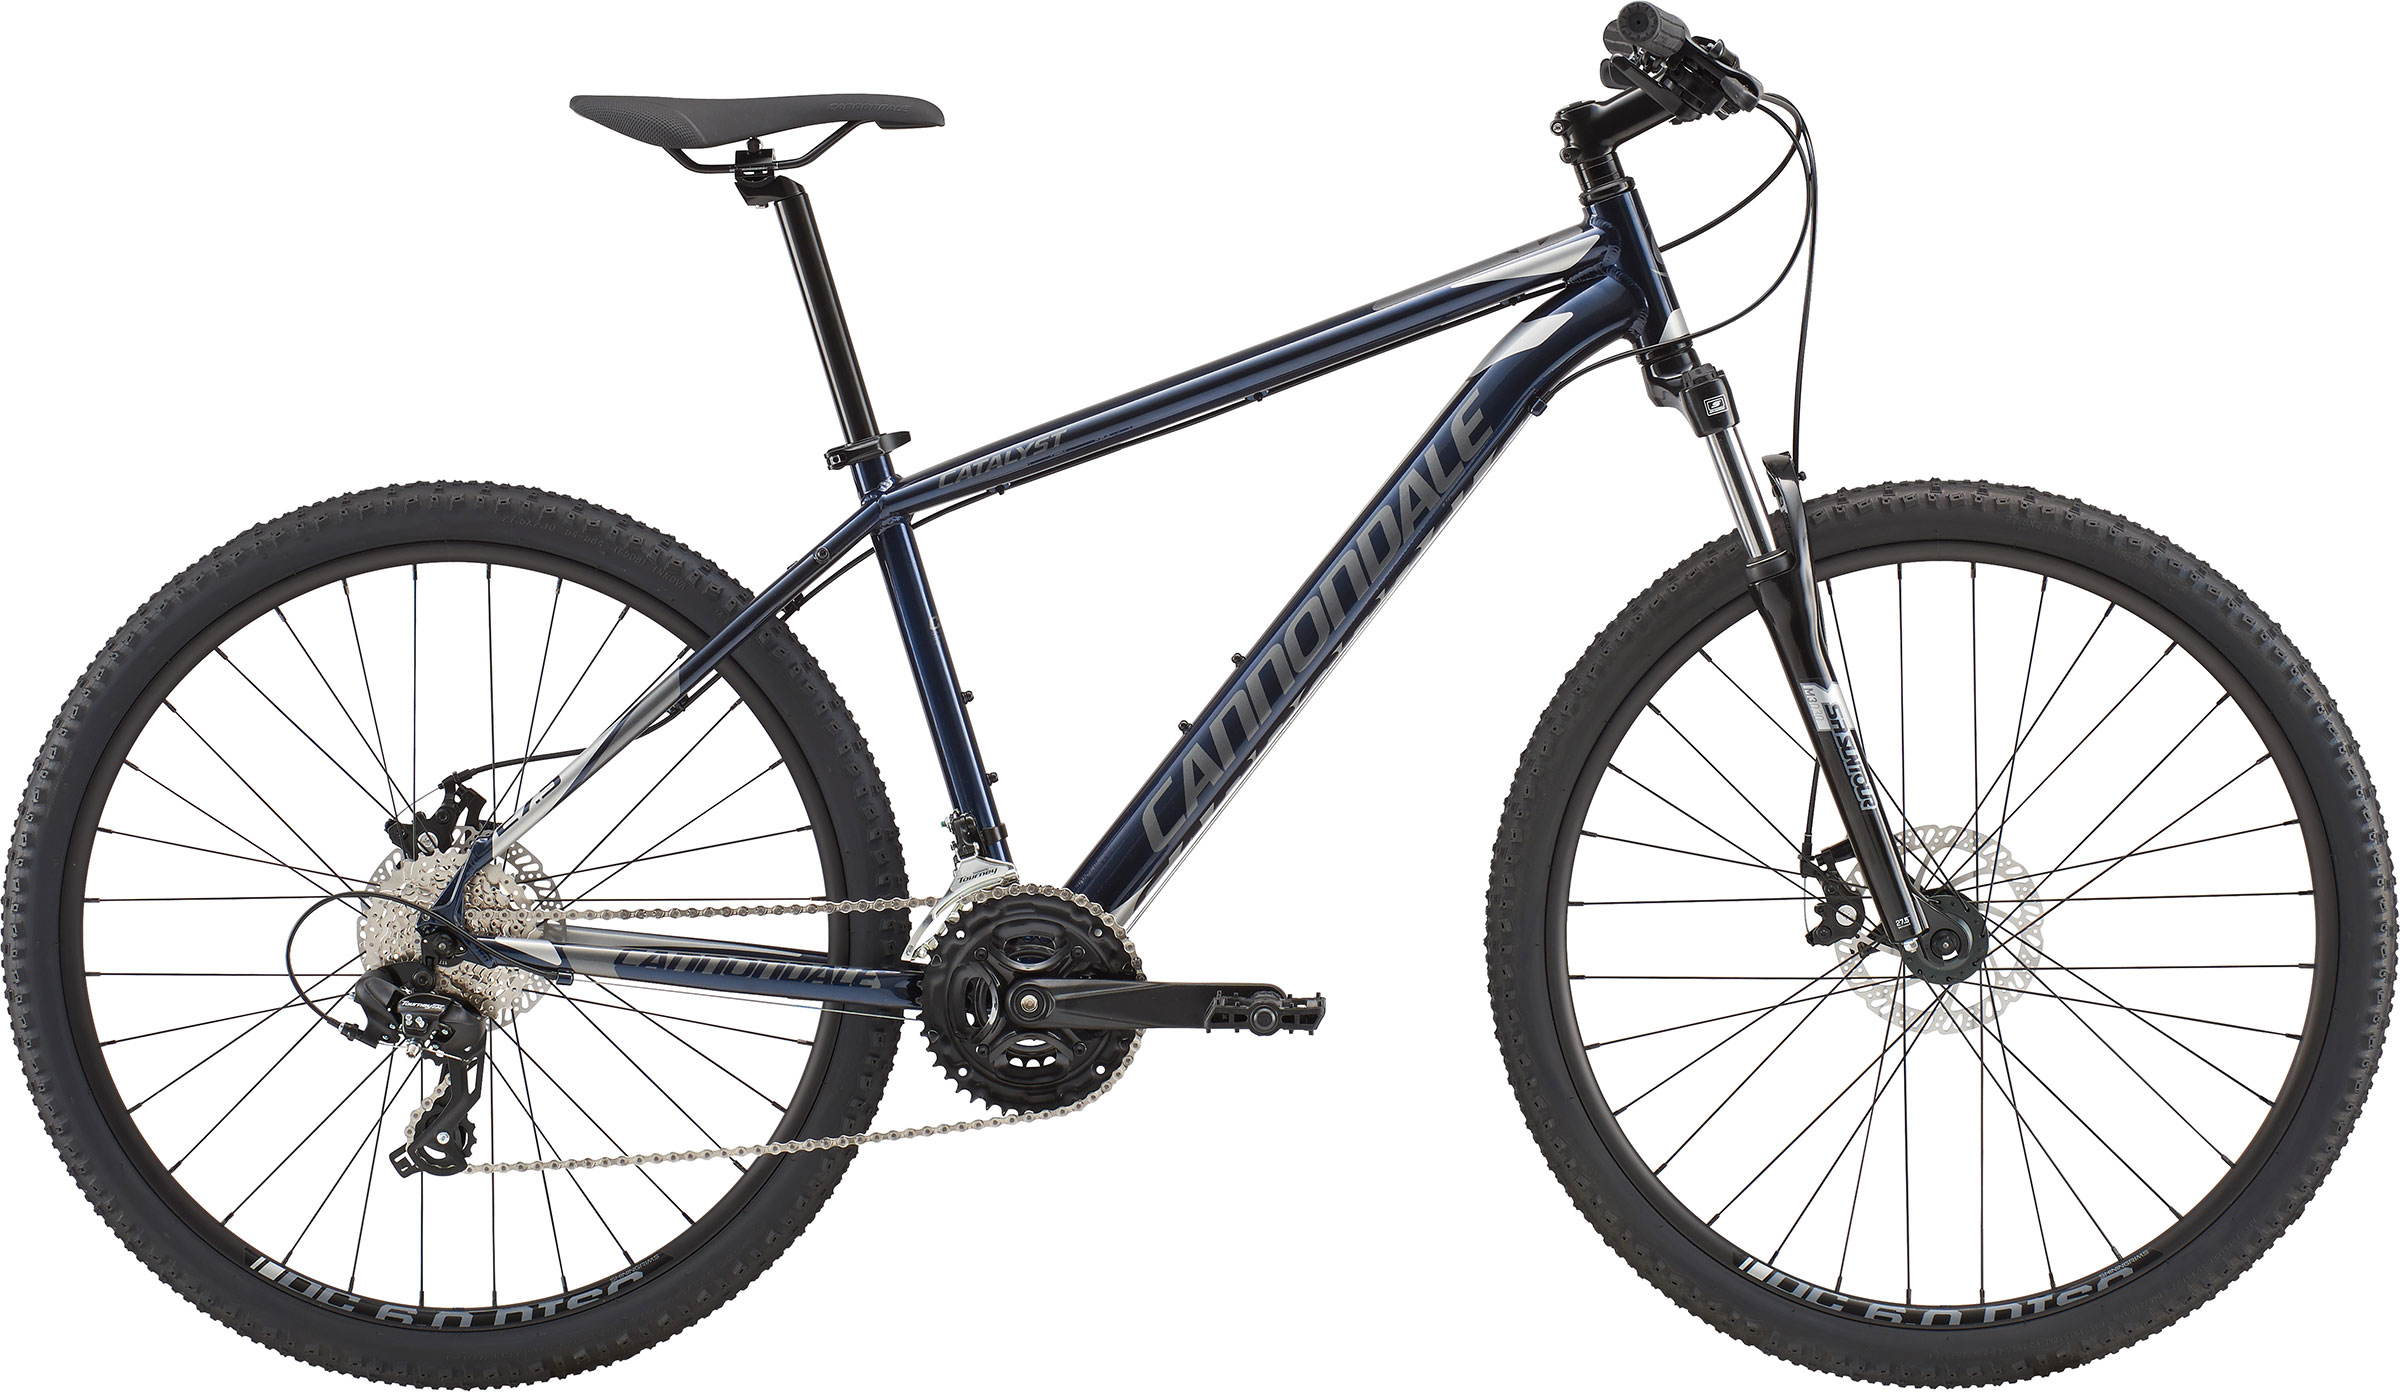 gebed geld Pech Cannondale Catalyst 3 - Old Town Bicycle